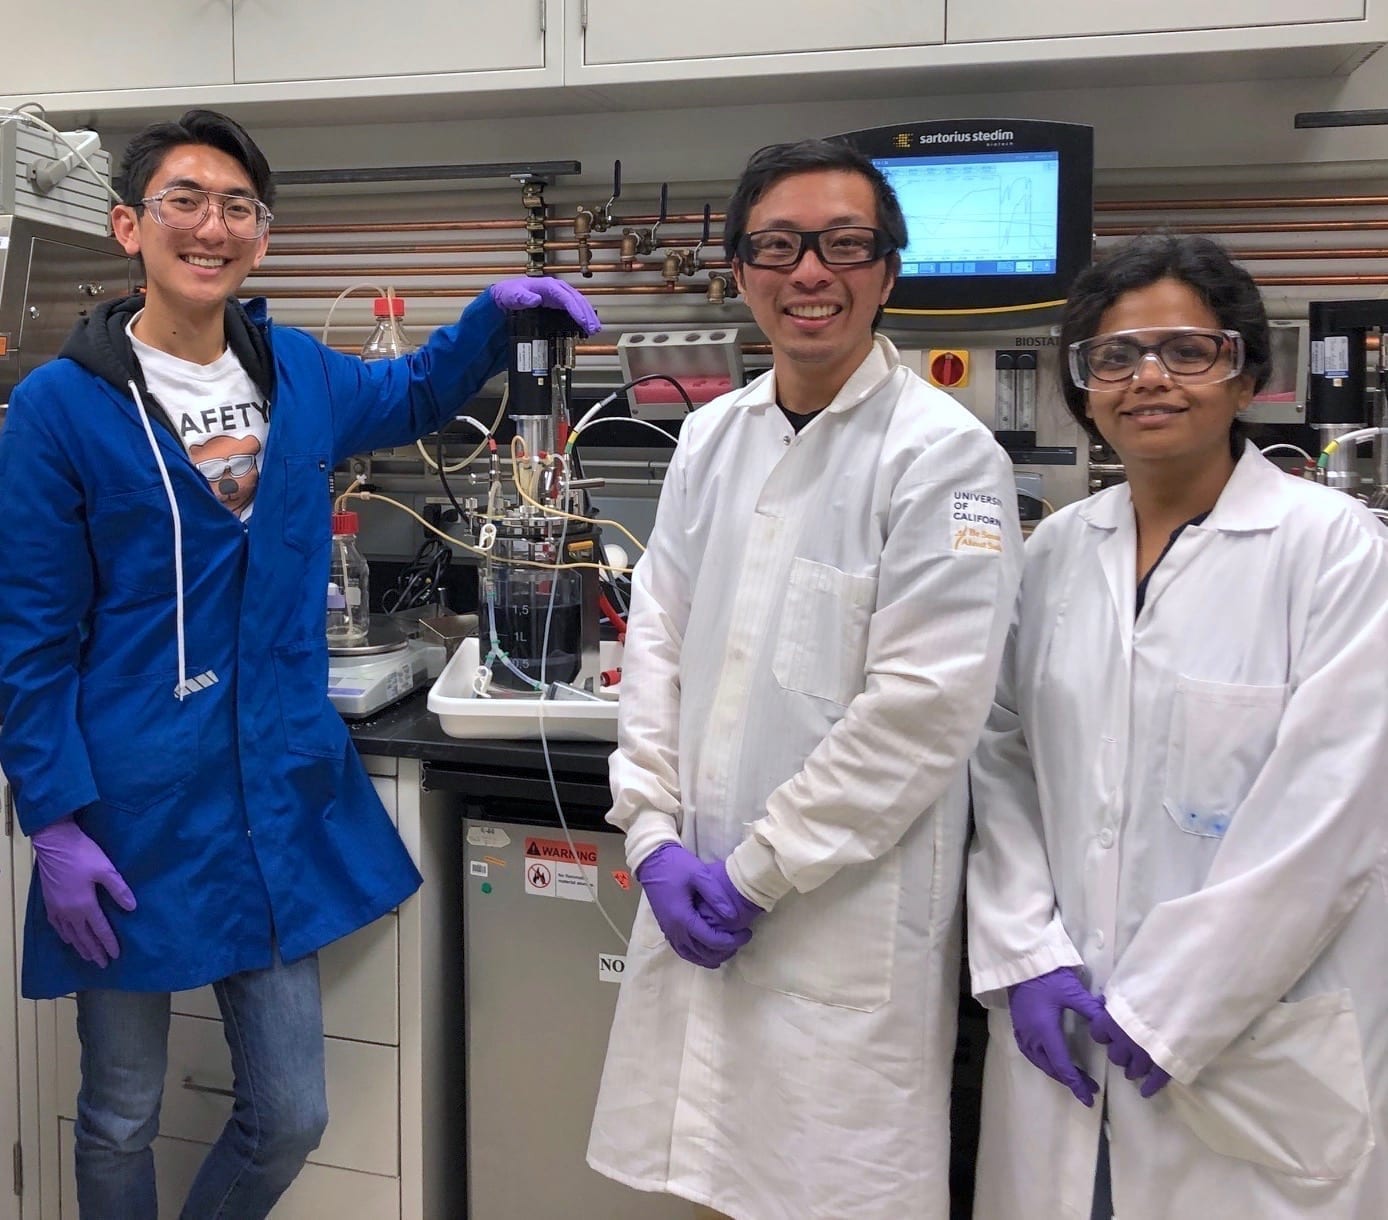 A new way of dramatically speeding up production of innovative bio-based fuels, materials, and chemicals